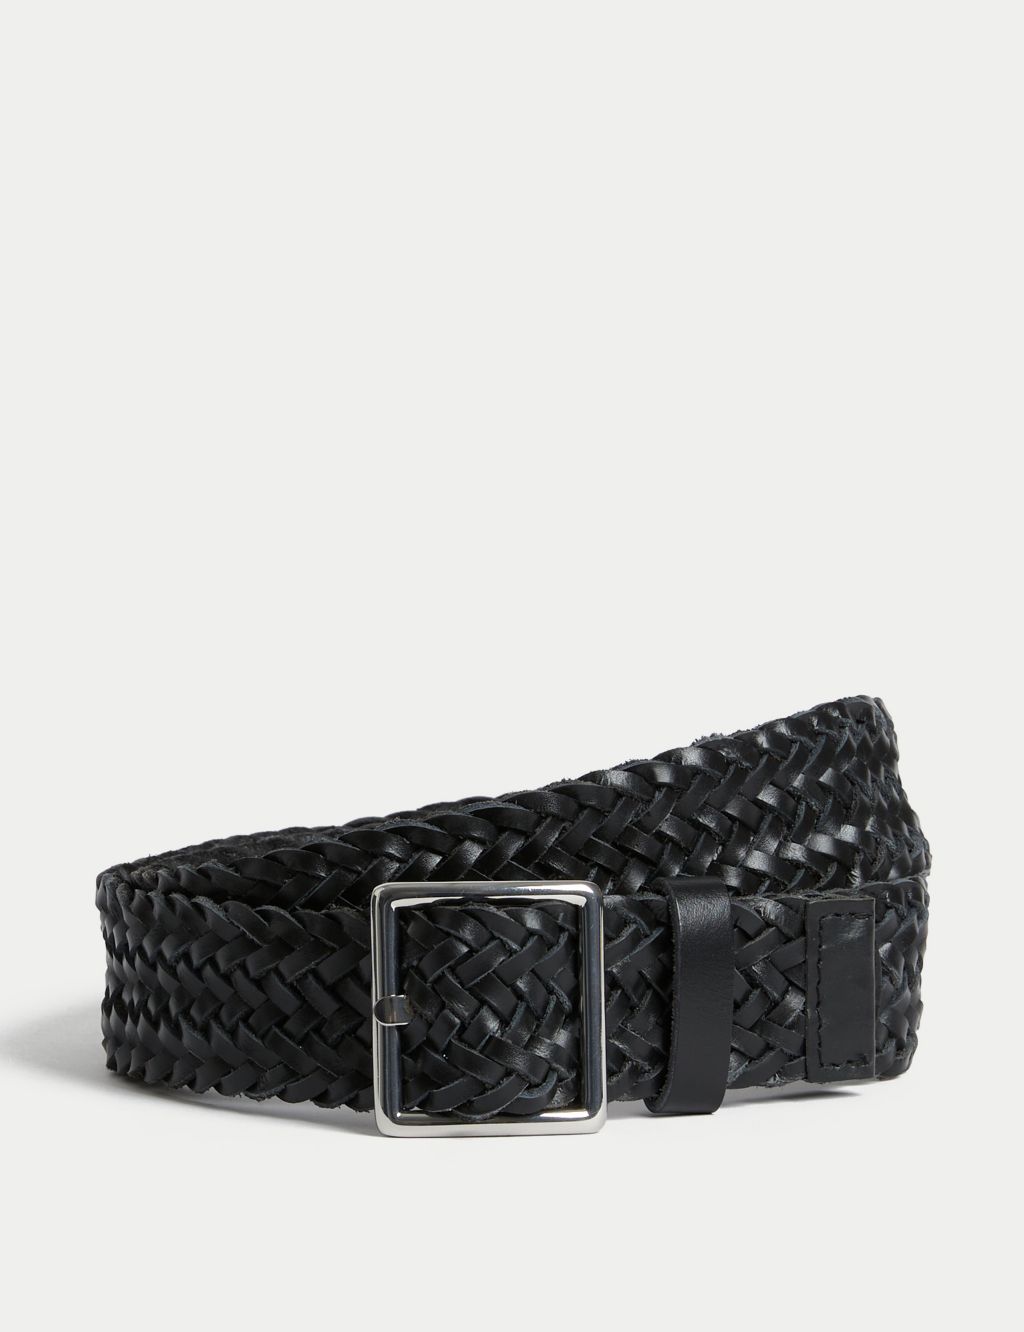 Leather Woven Jeans Belt | M&S Collection | M&S